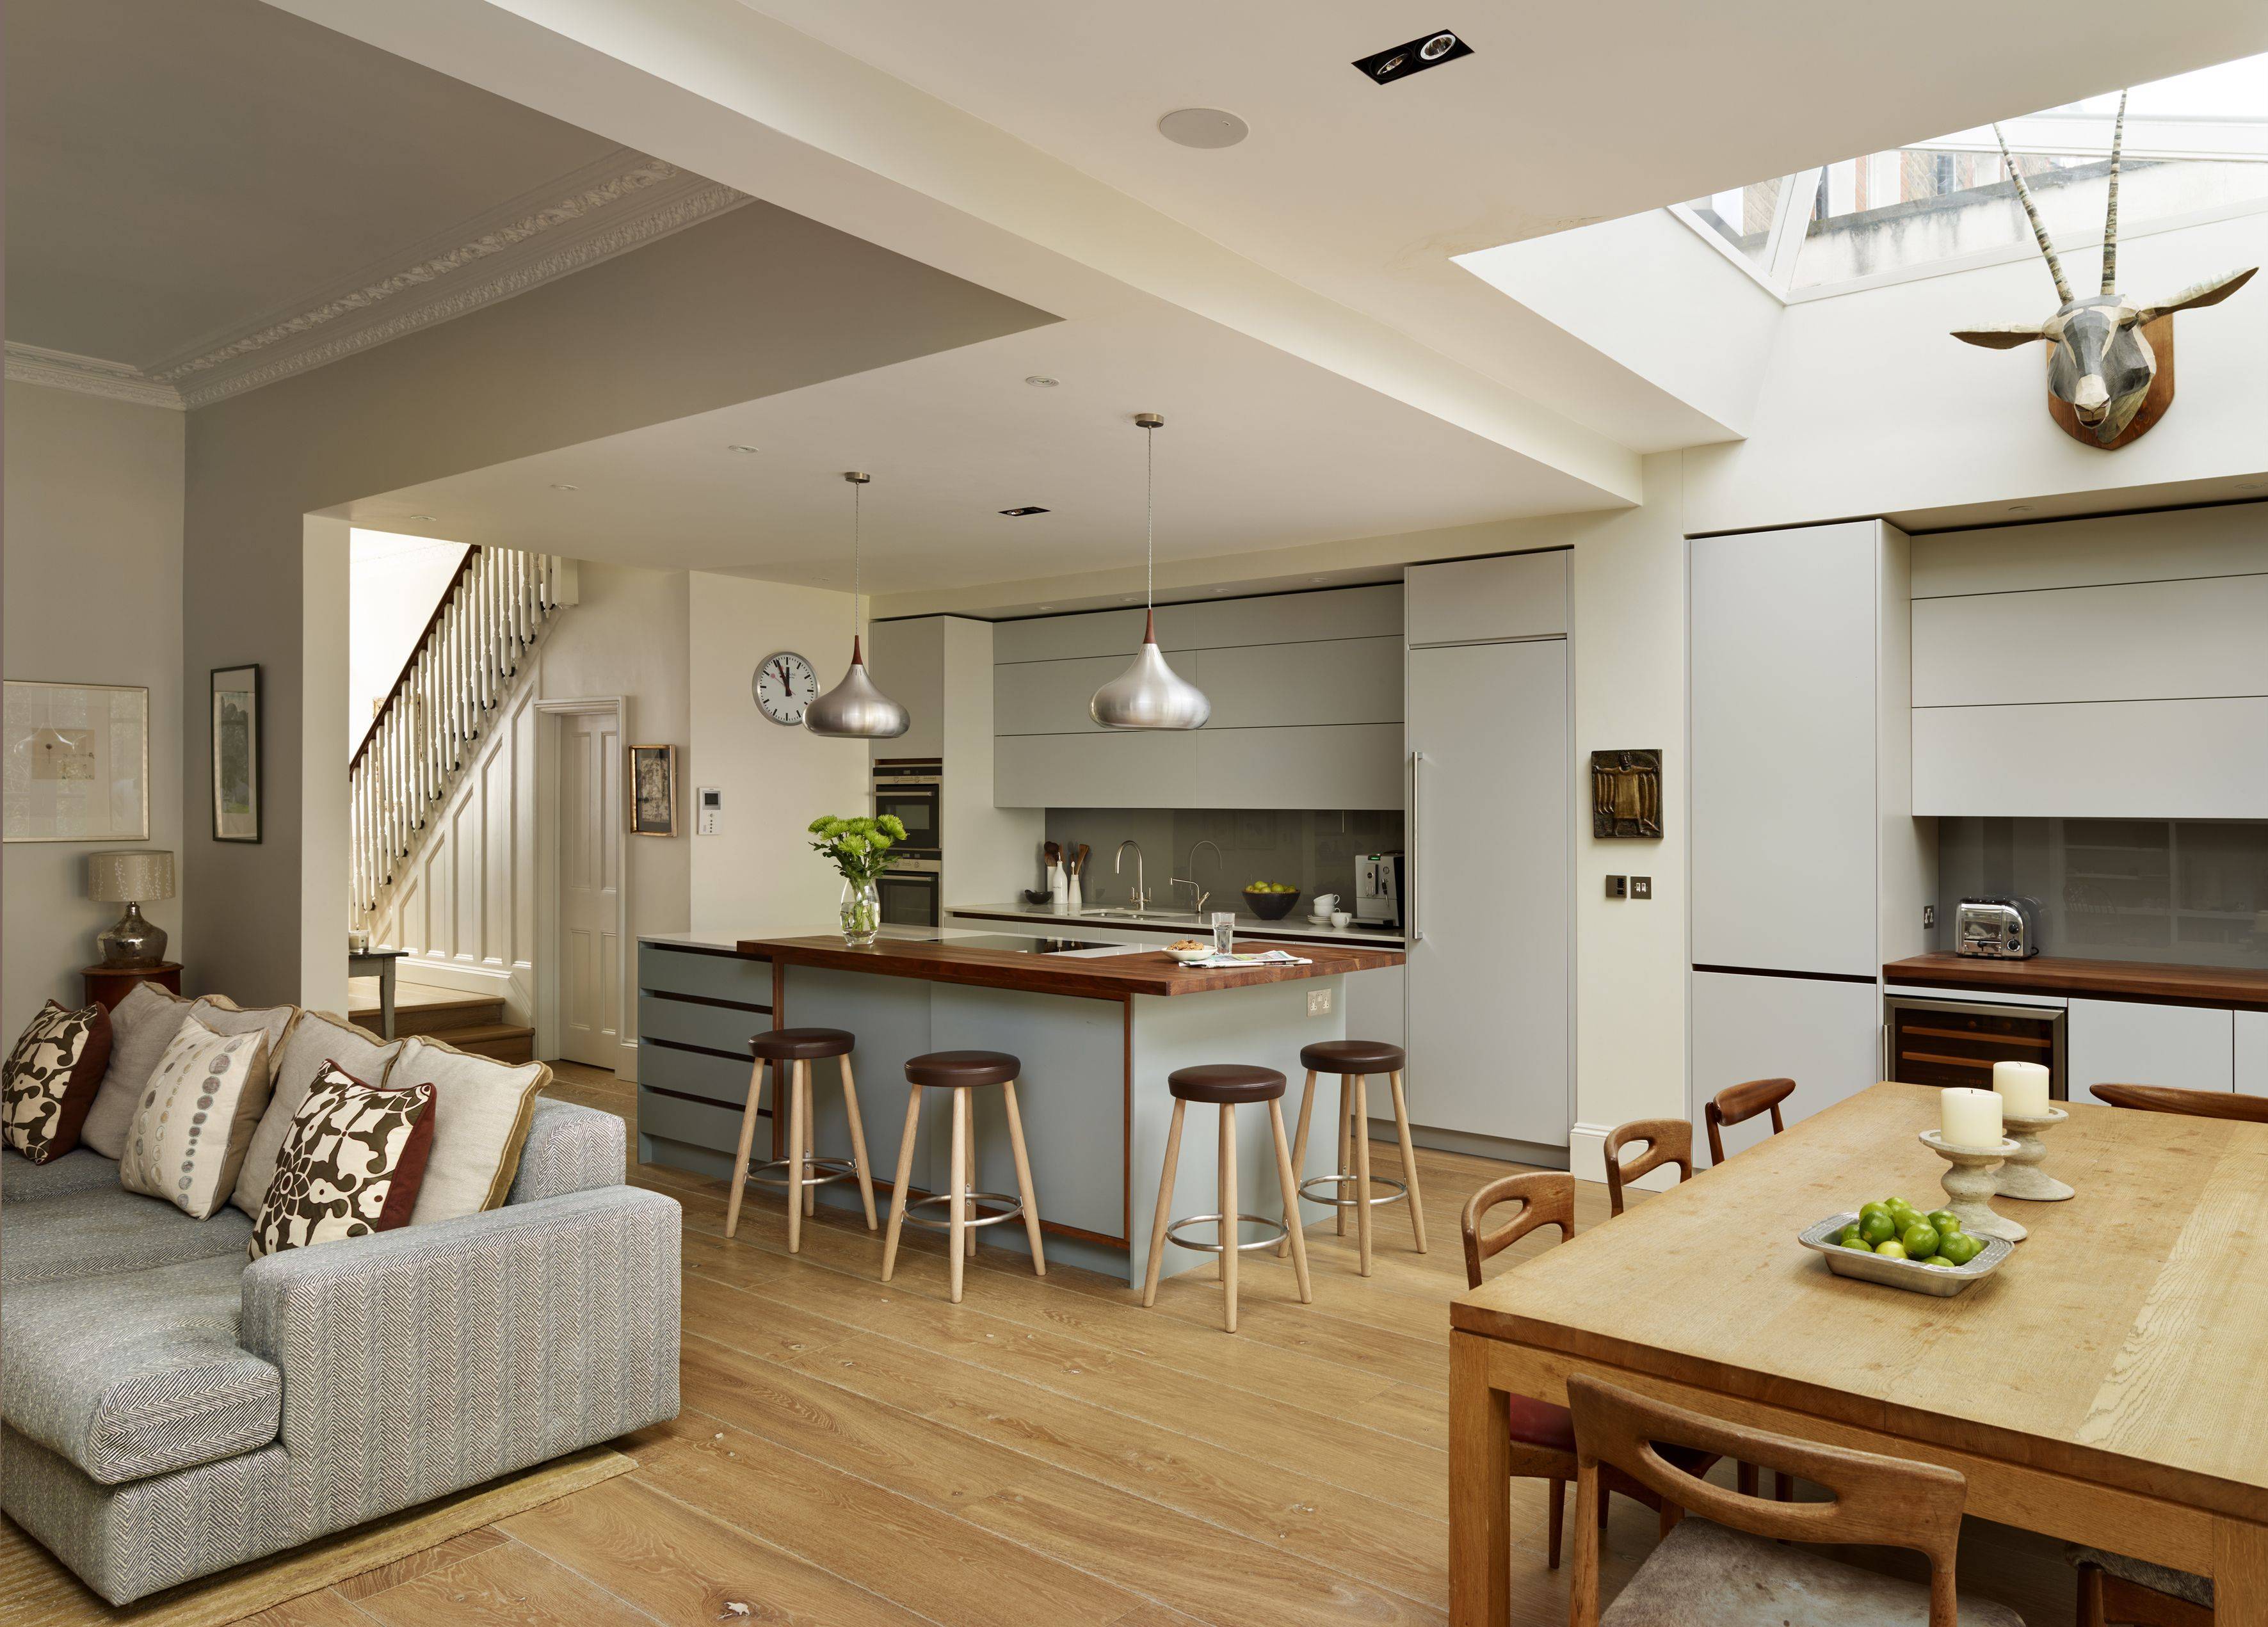 Open Plan Kitchen Living Room Inspirational Roundhouse Urbo Kitchen In Extension Of Open Plan Kitchen Living Room 